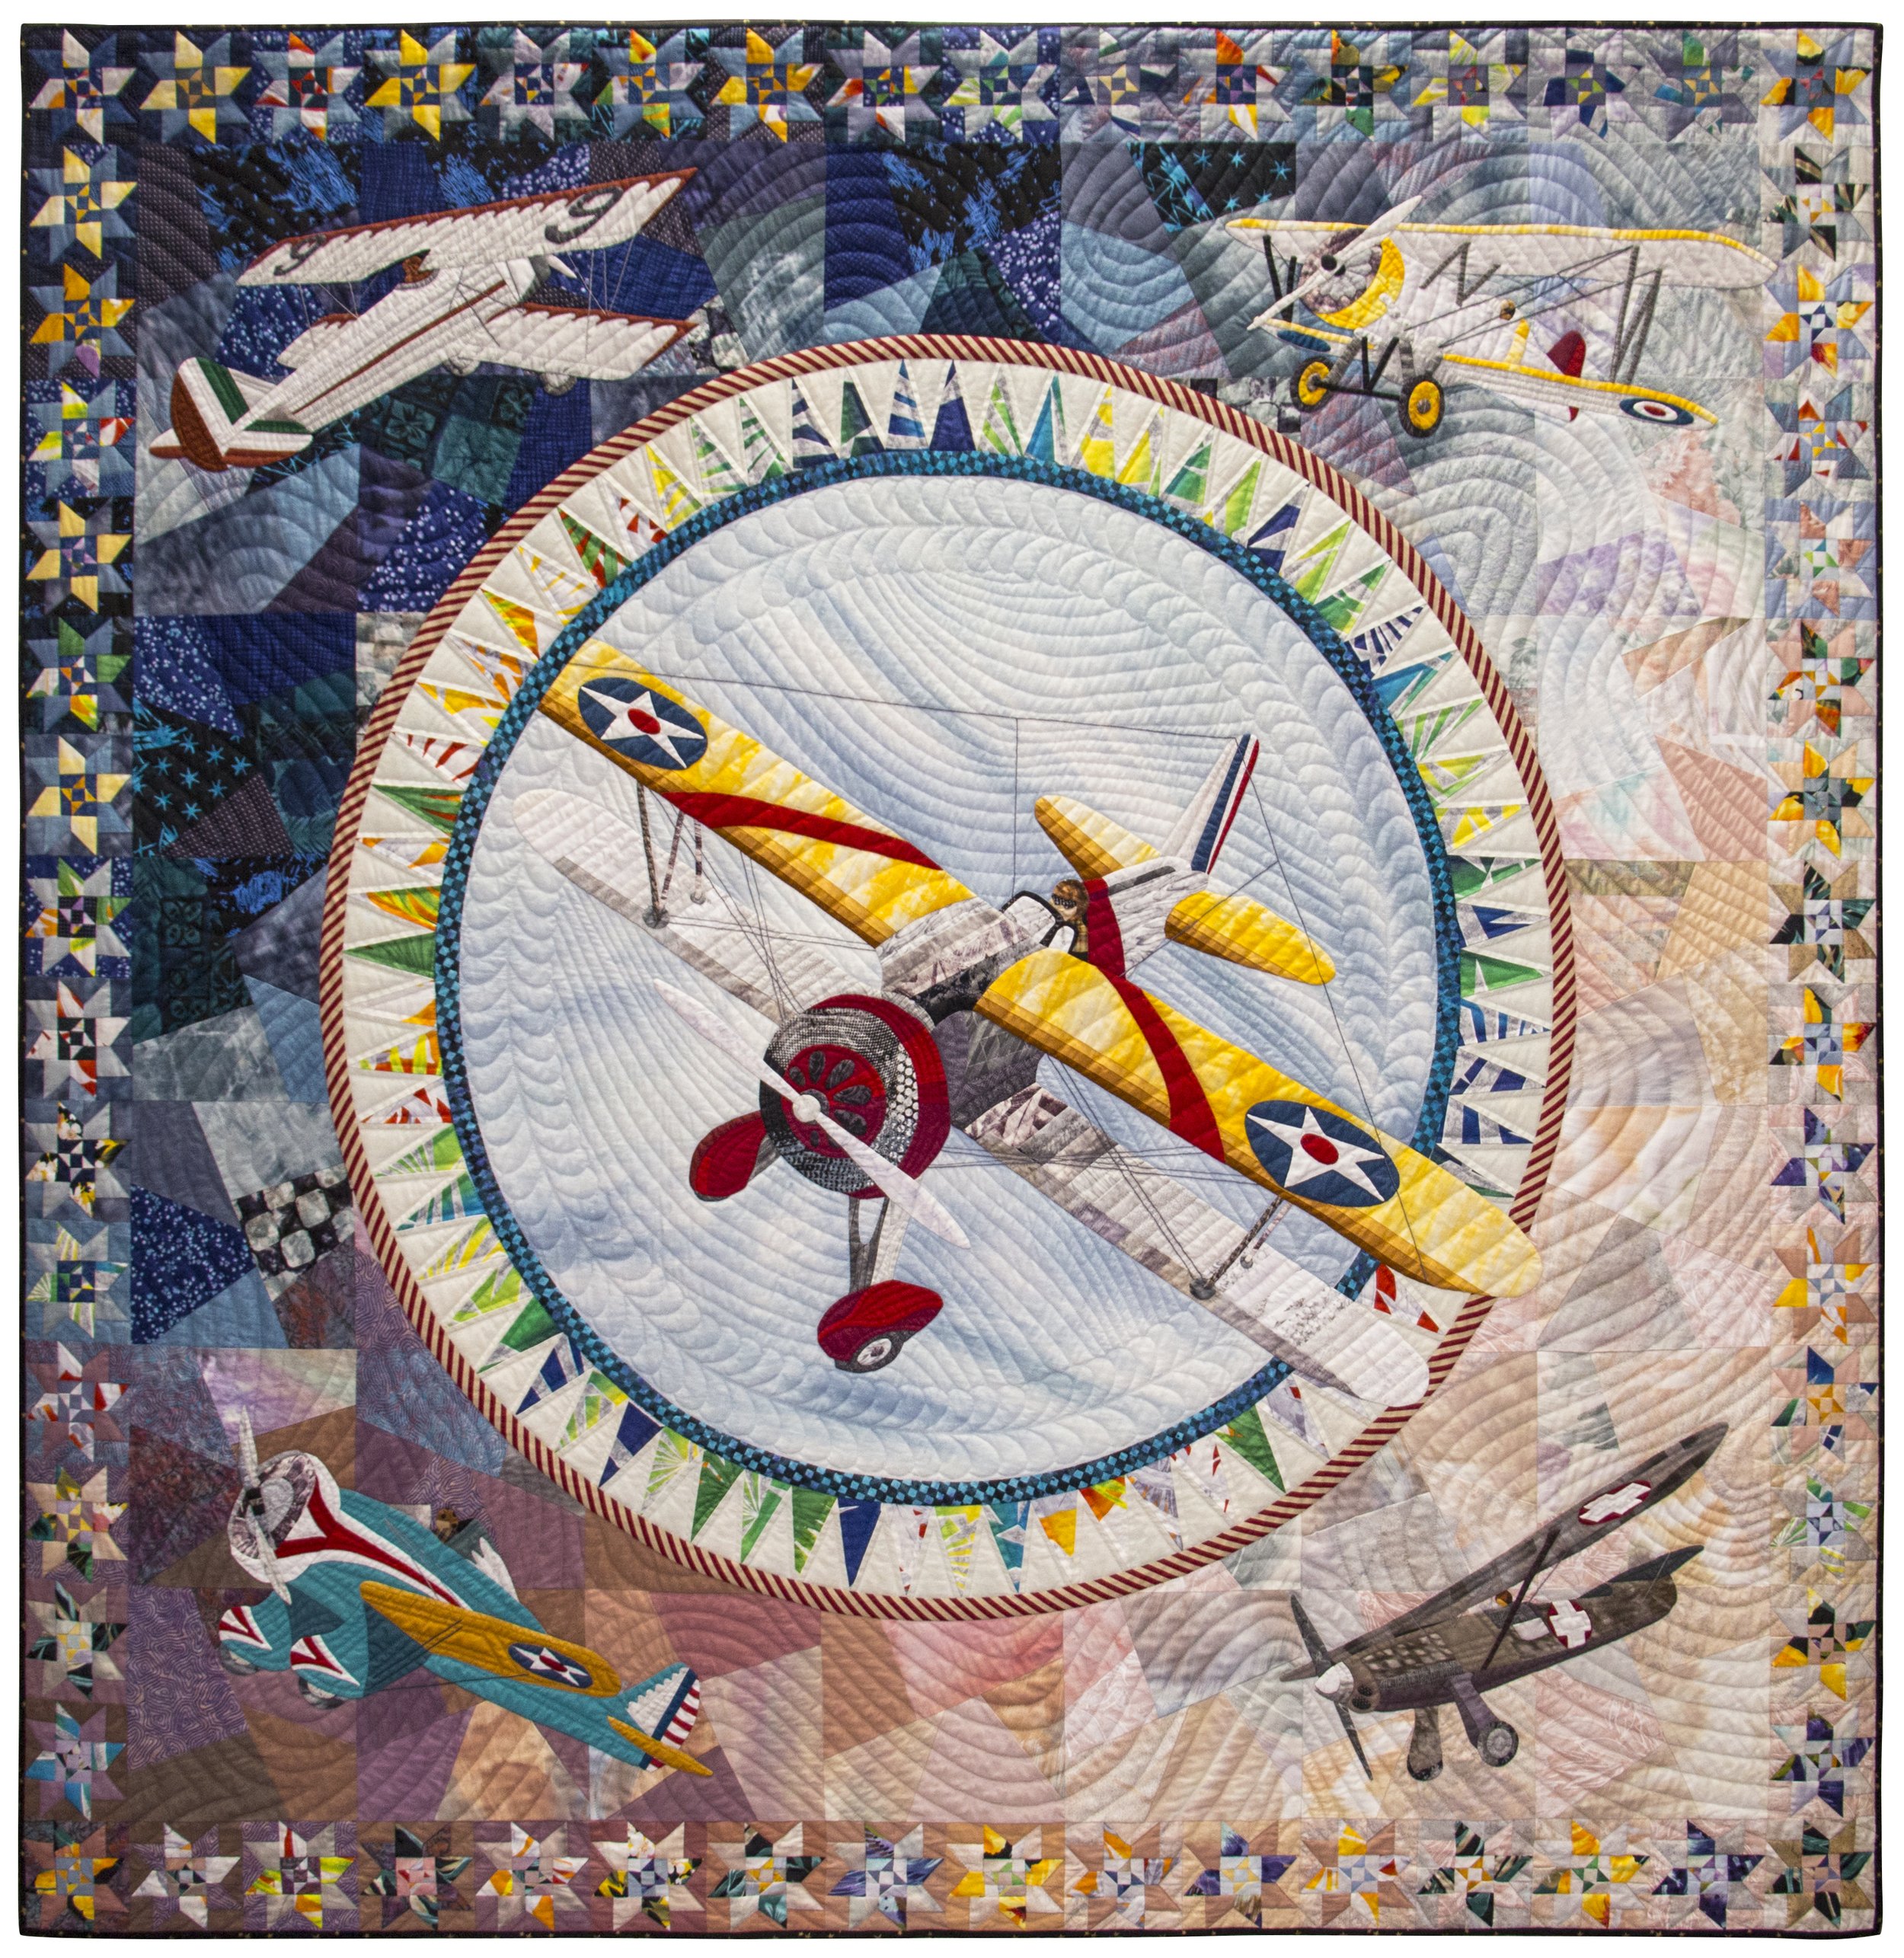 Left: Jonathan Shannon, Air Show, 1992, Loan Courtesy of the National Quilt Museum, Paducah. Gift of Jonathan J. Shannon.